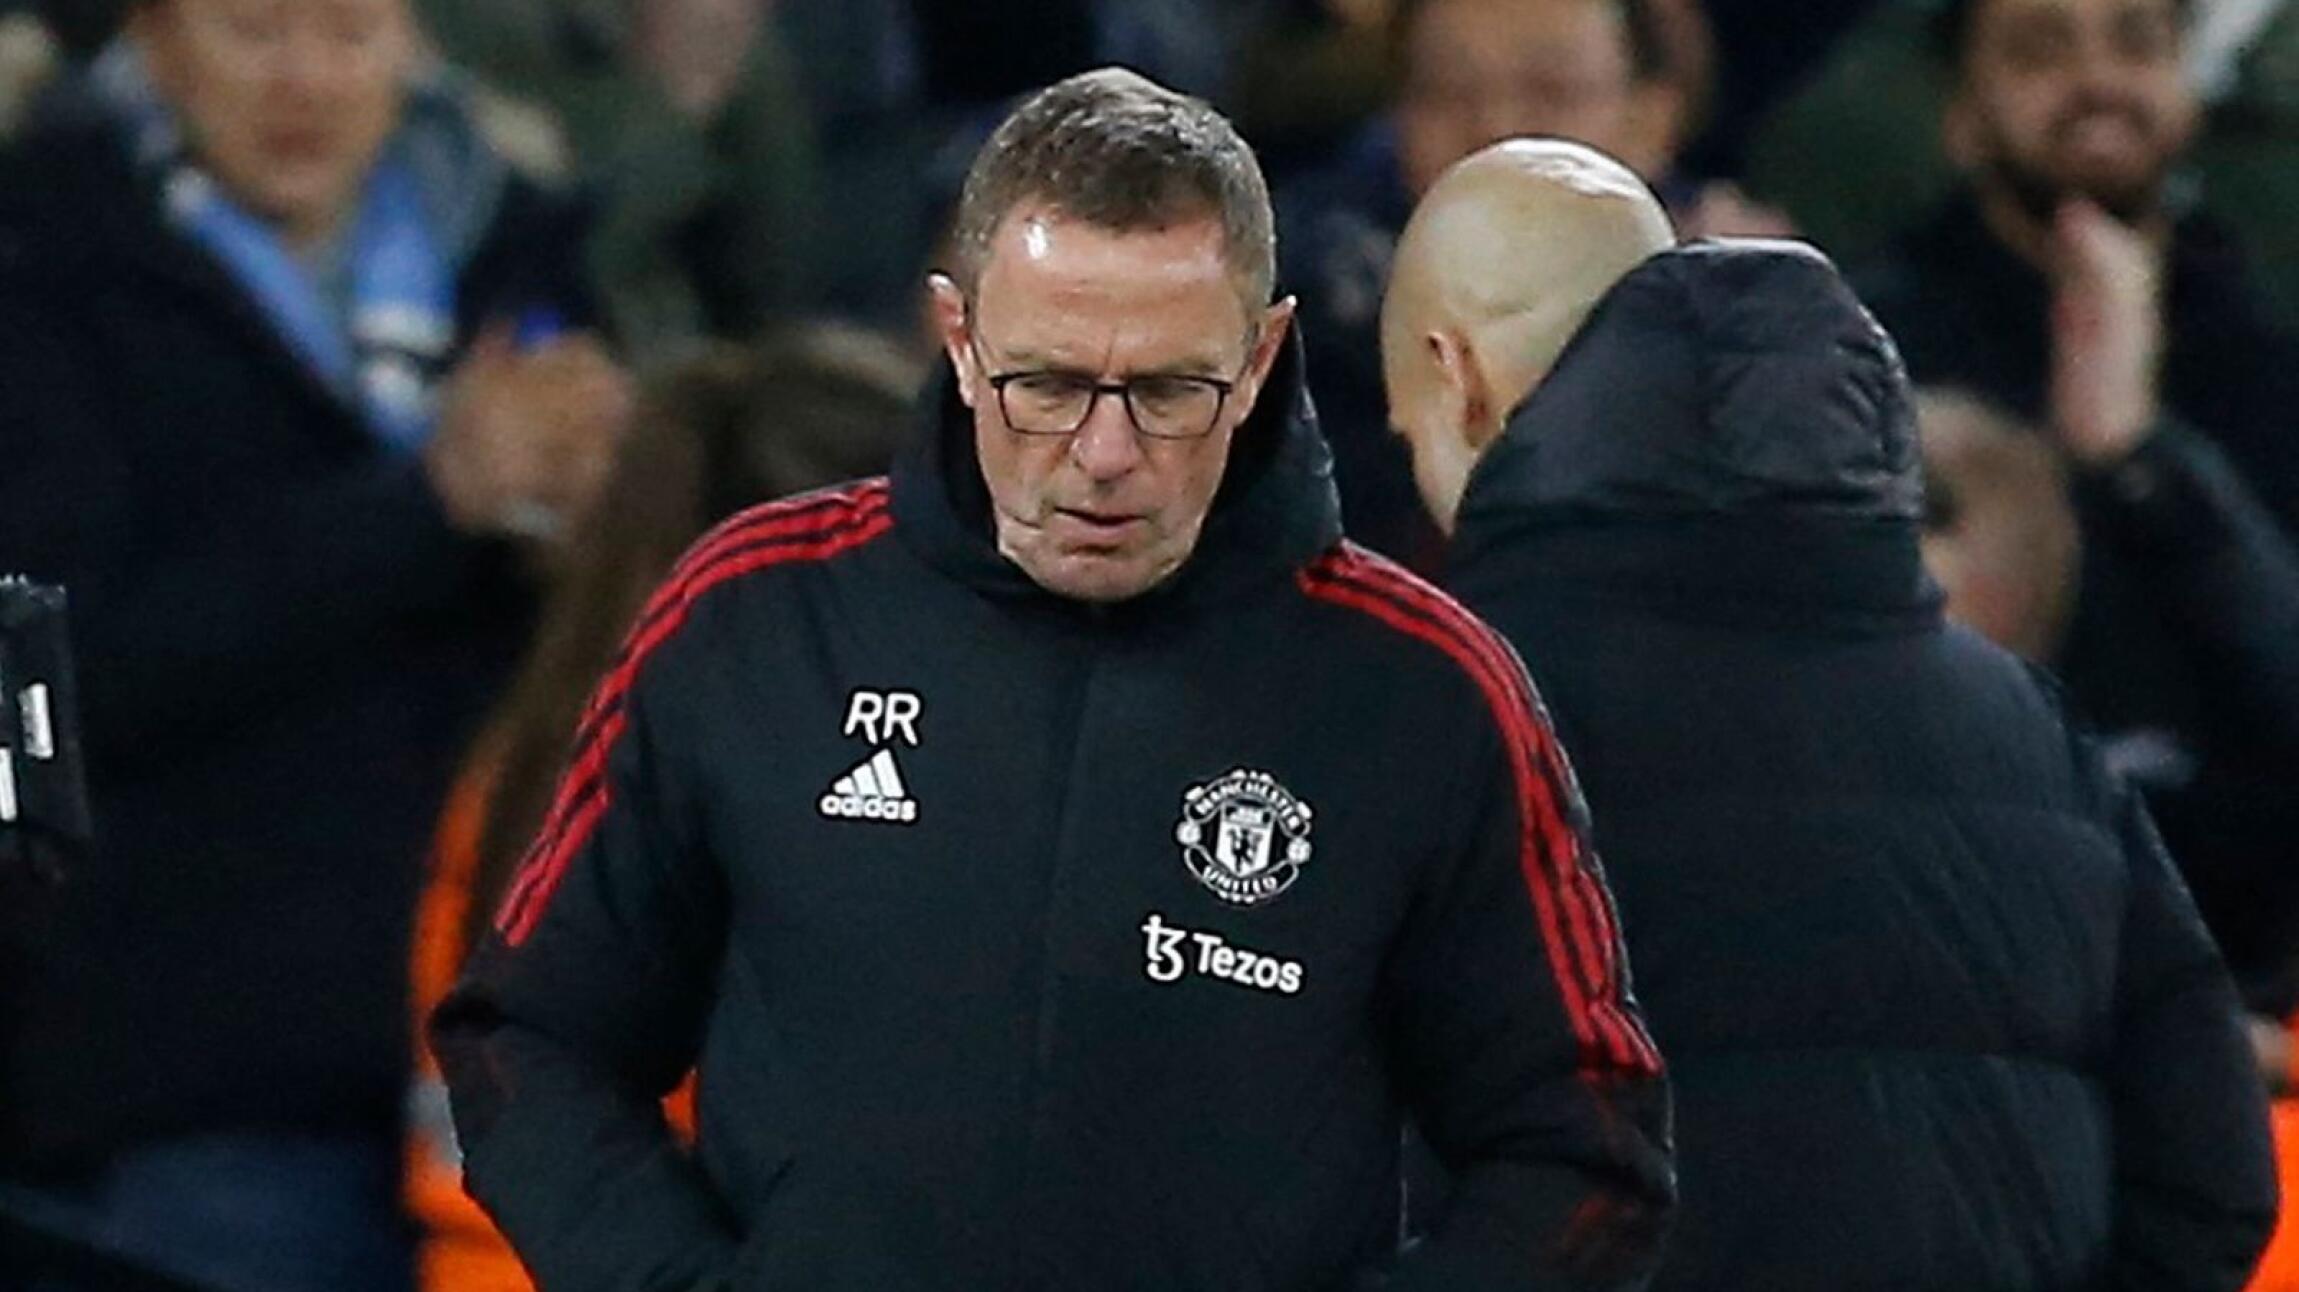 Manchester United interim manager Ralf Rangnick looks dejected after their Premier League match against Manchester City